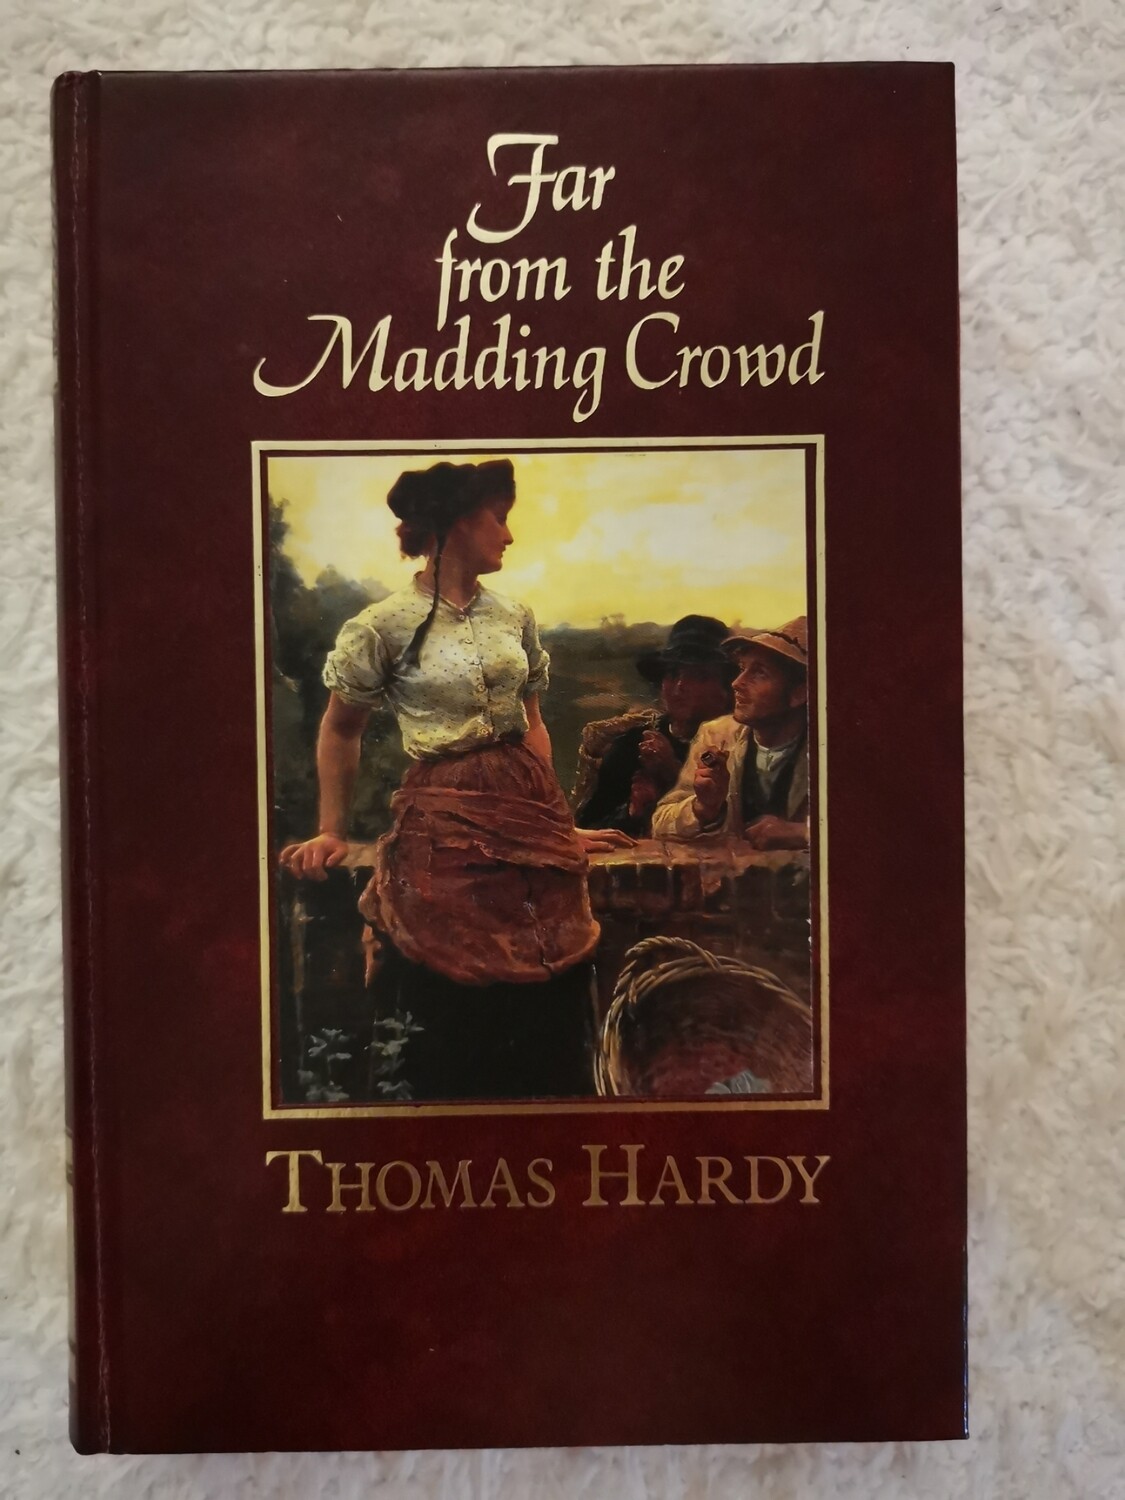 Far from the madding crowd, Thomas Hardy